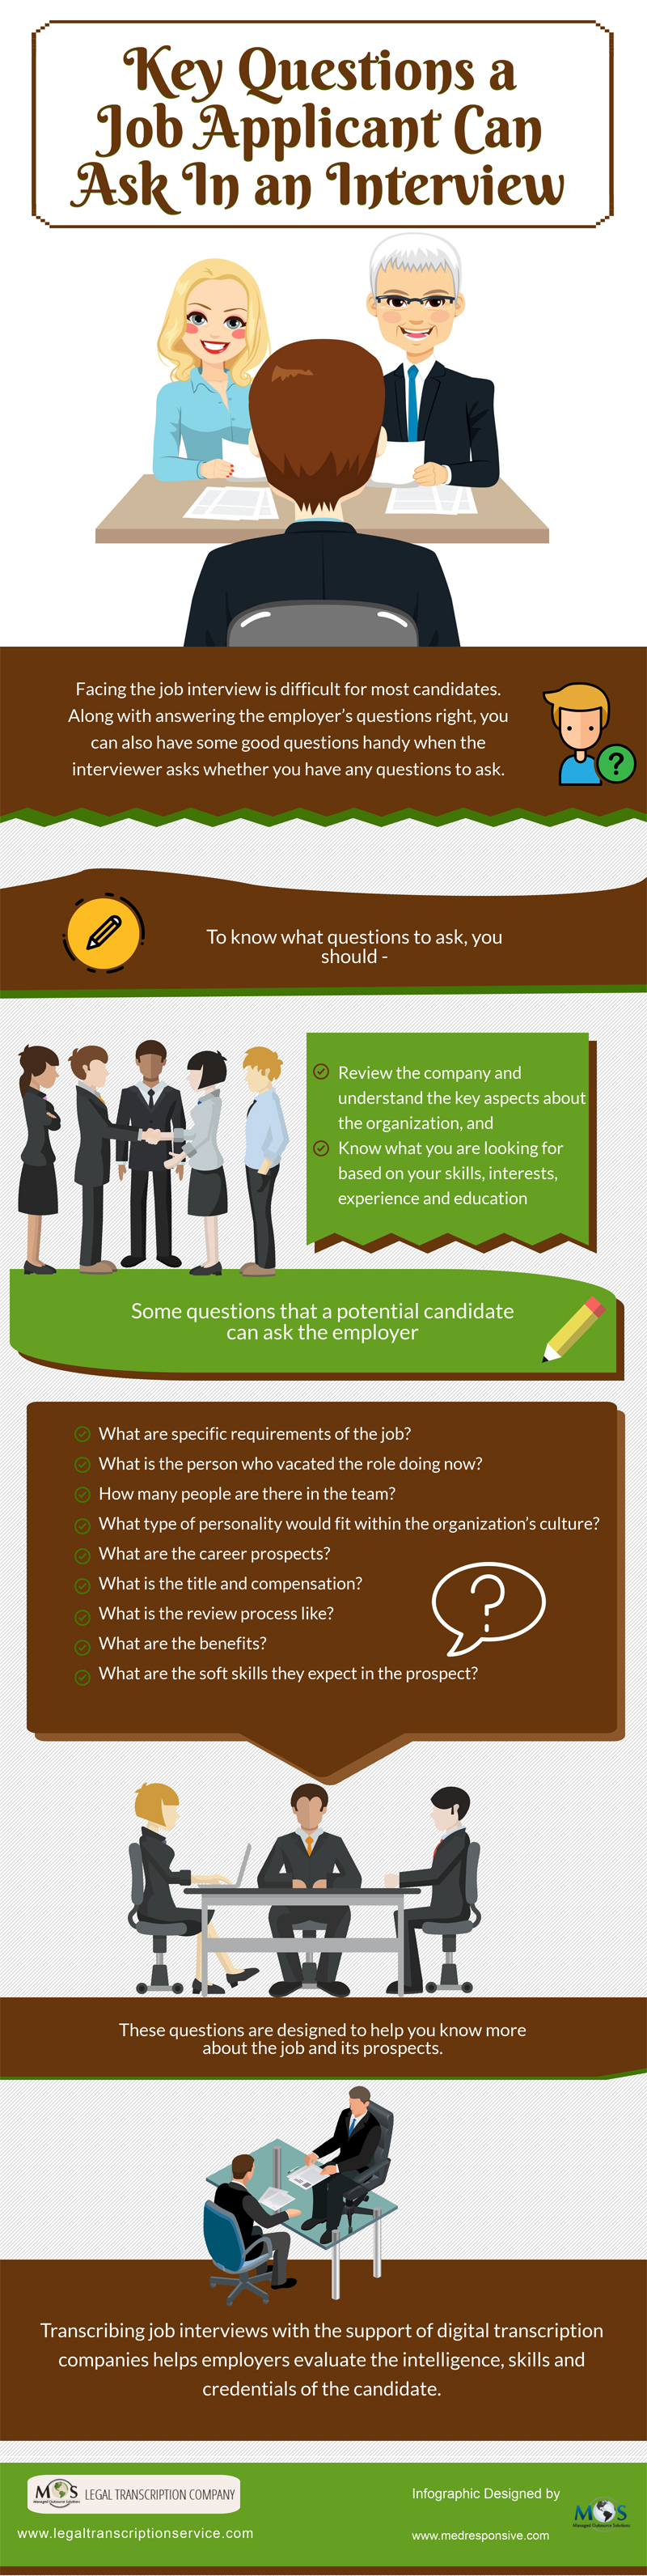 Key Questions a Job Applicant Can Ask In an Interview